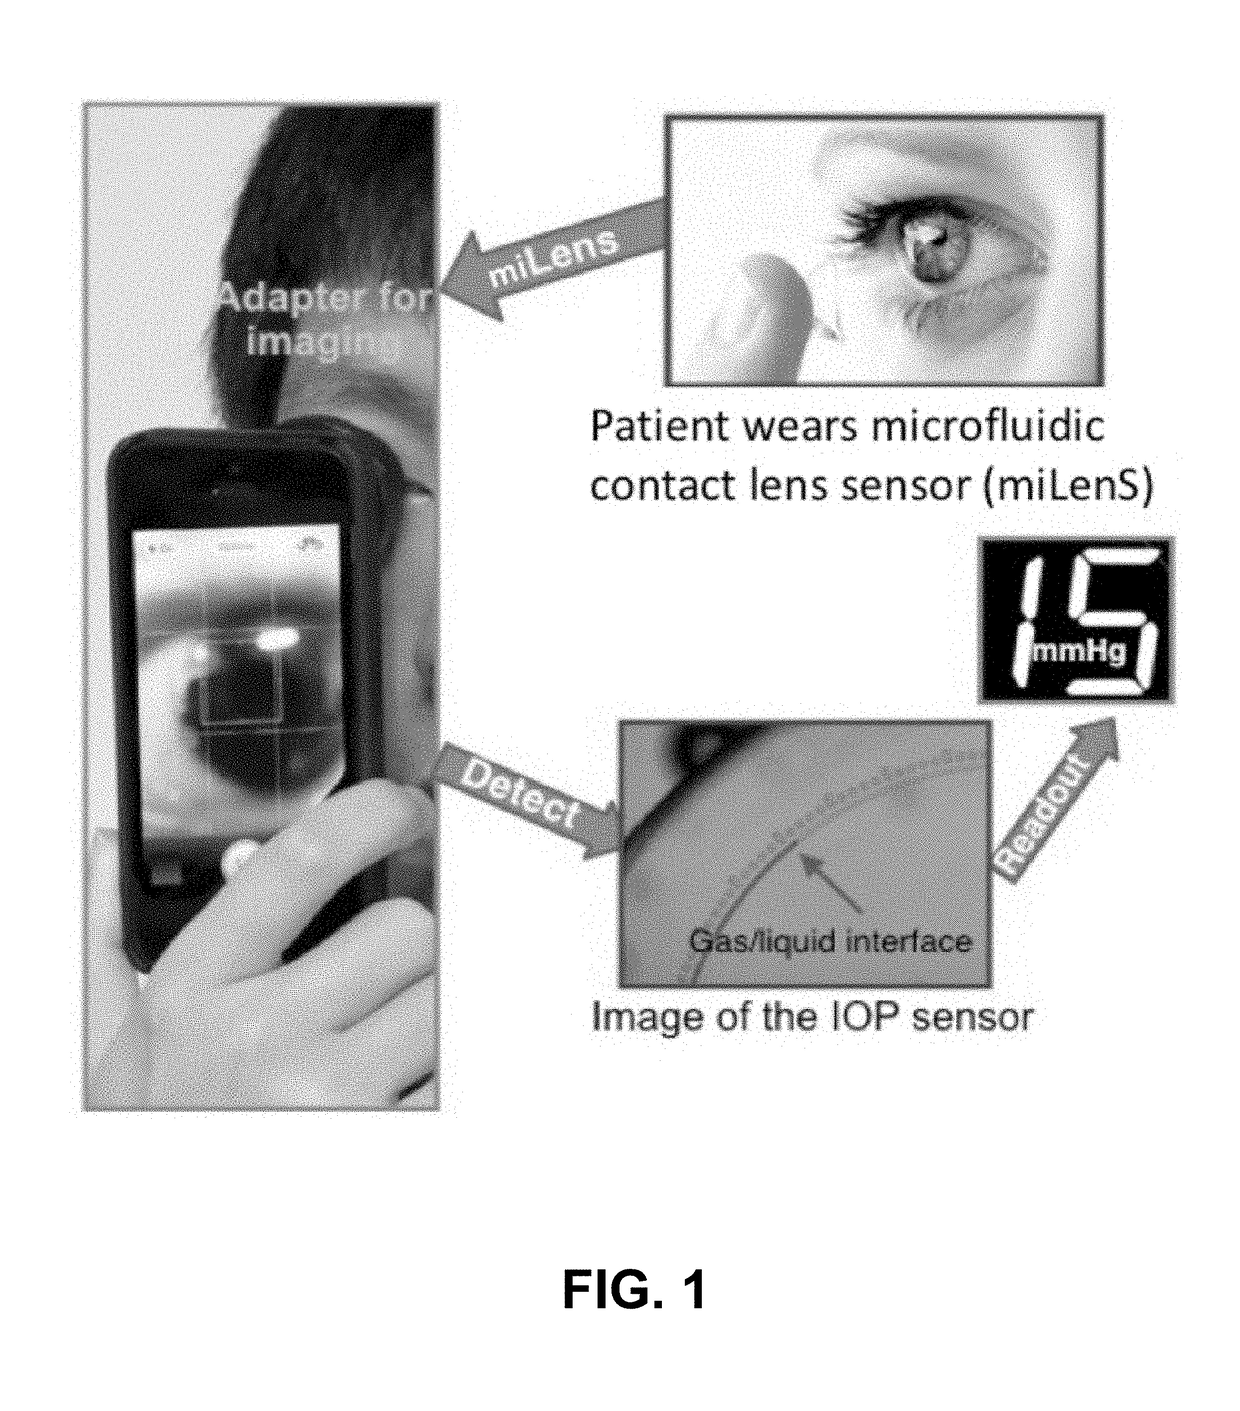 Closed Microfluidic Network for Strain Sensing Embedded in a Contact Lens to Monitor IntraOcular Pressure